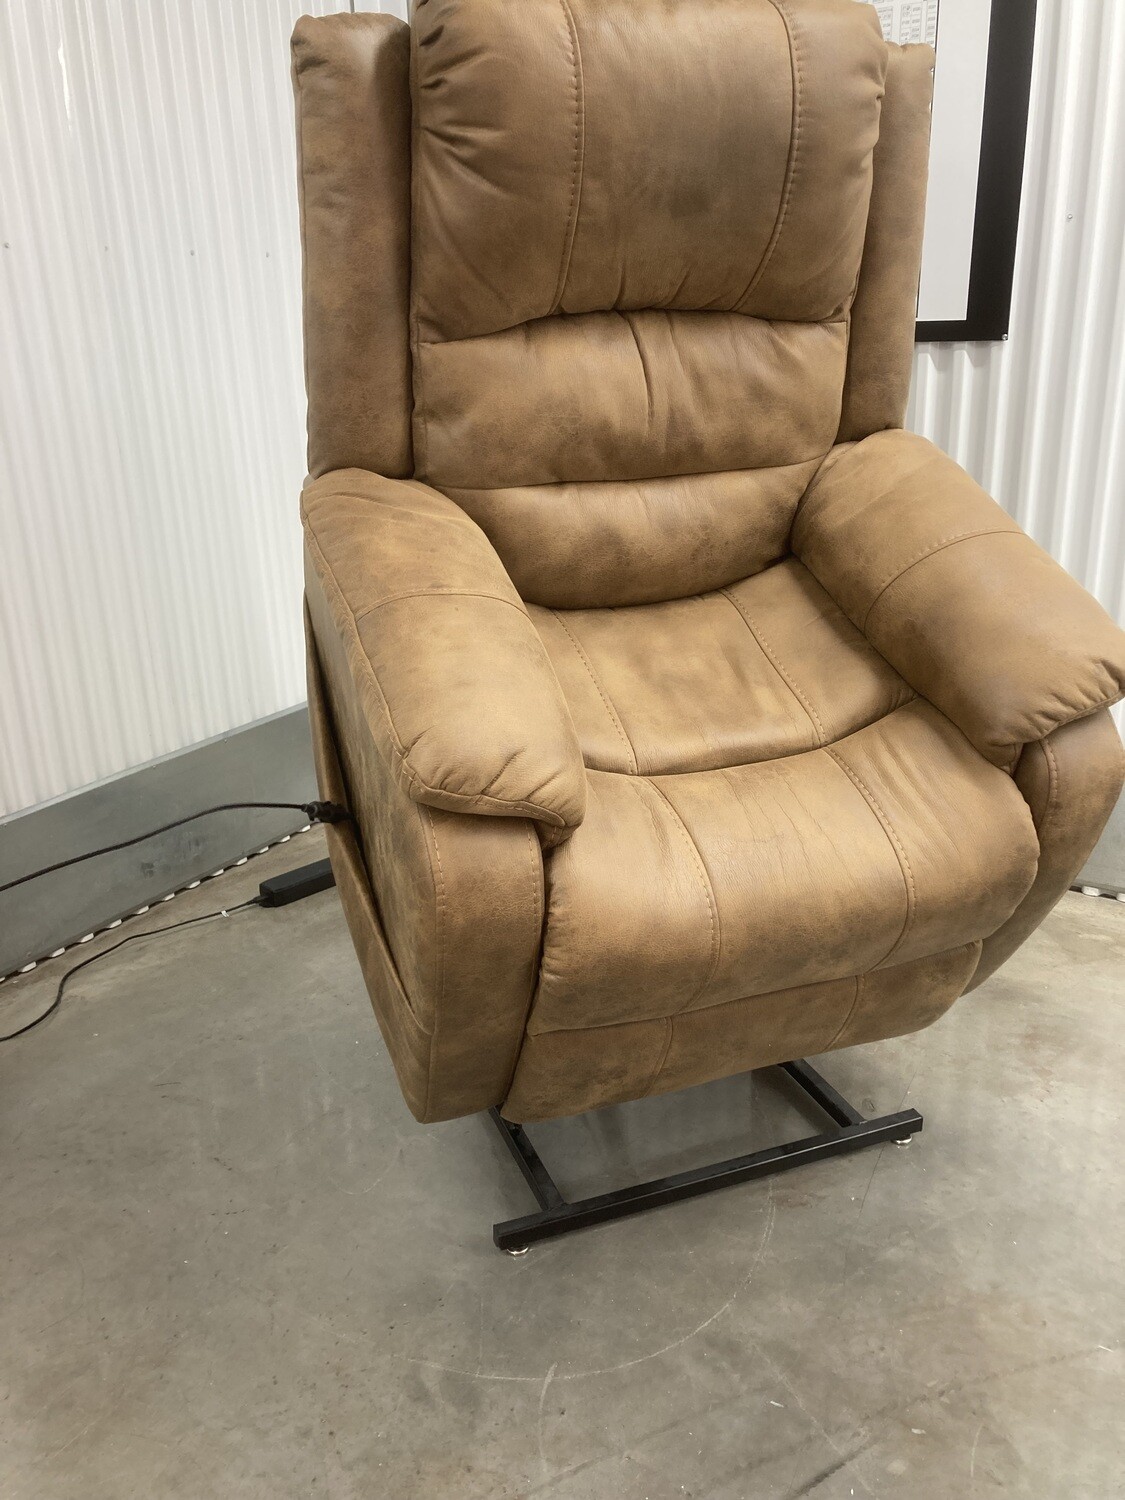 Power Lift Chair/ Recliner, brown leather-look fabric #2324